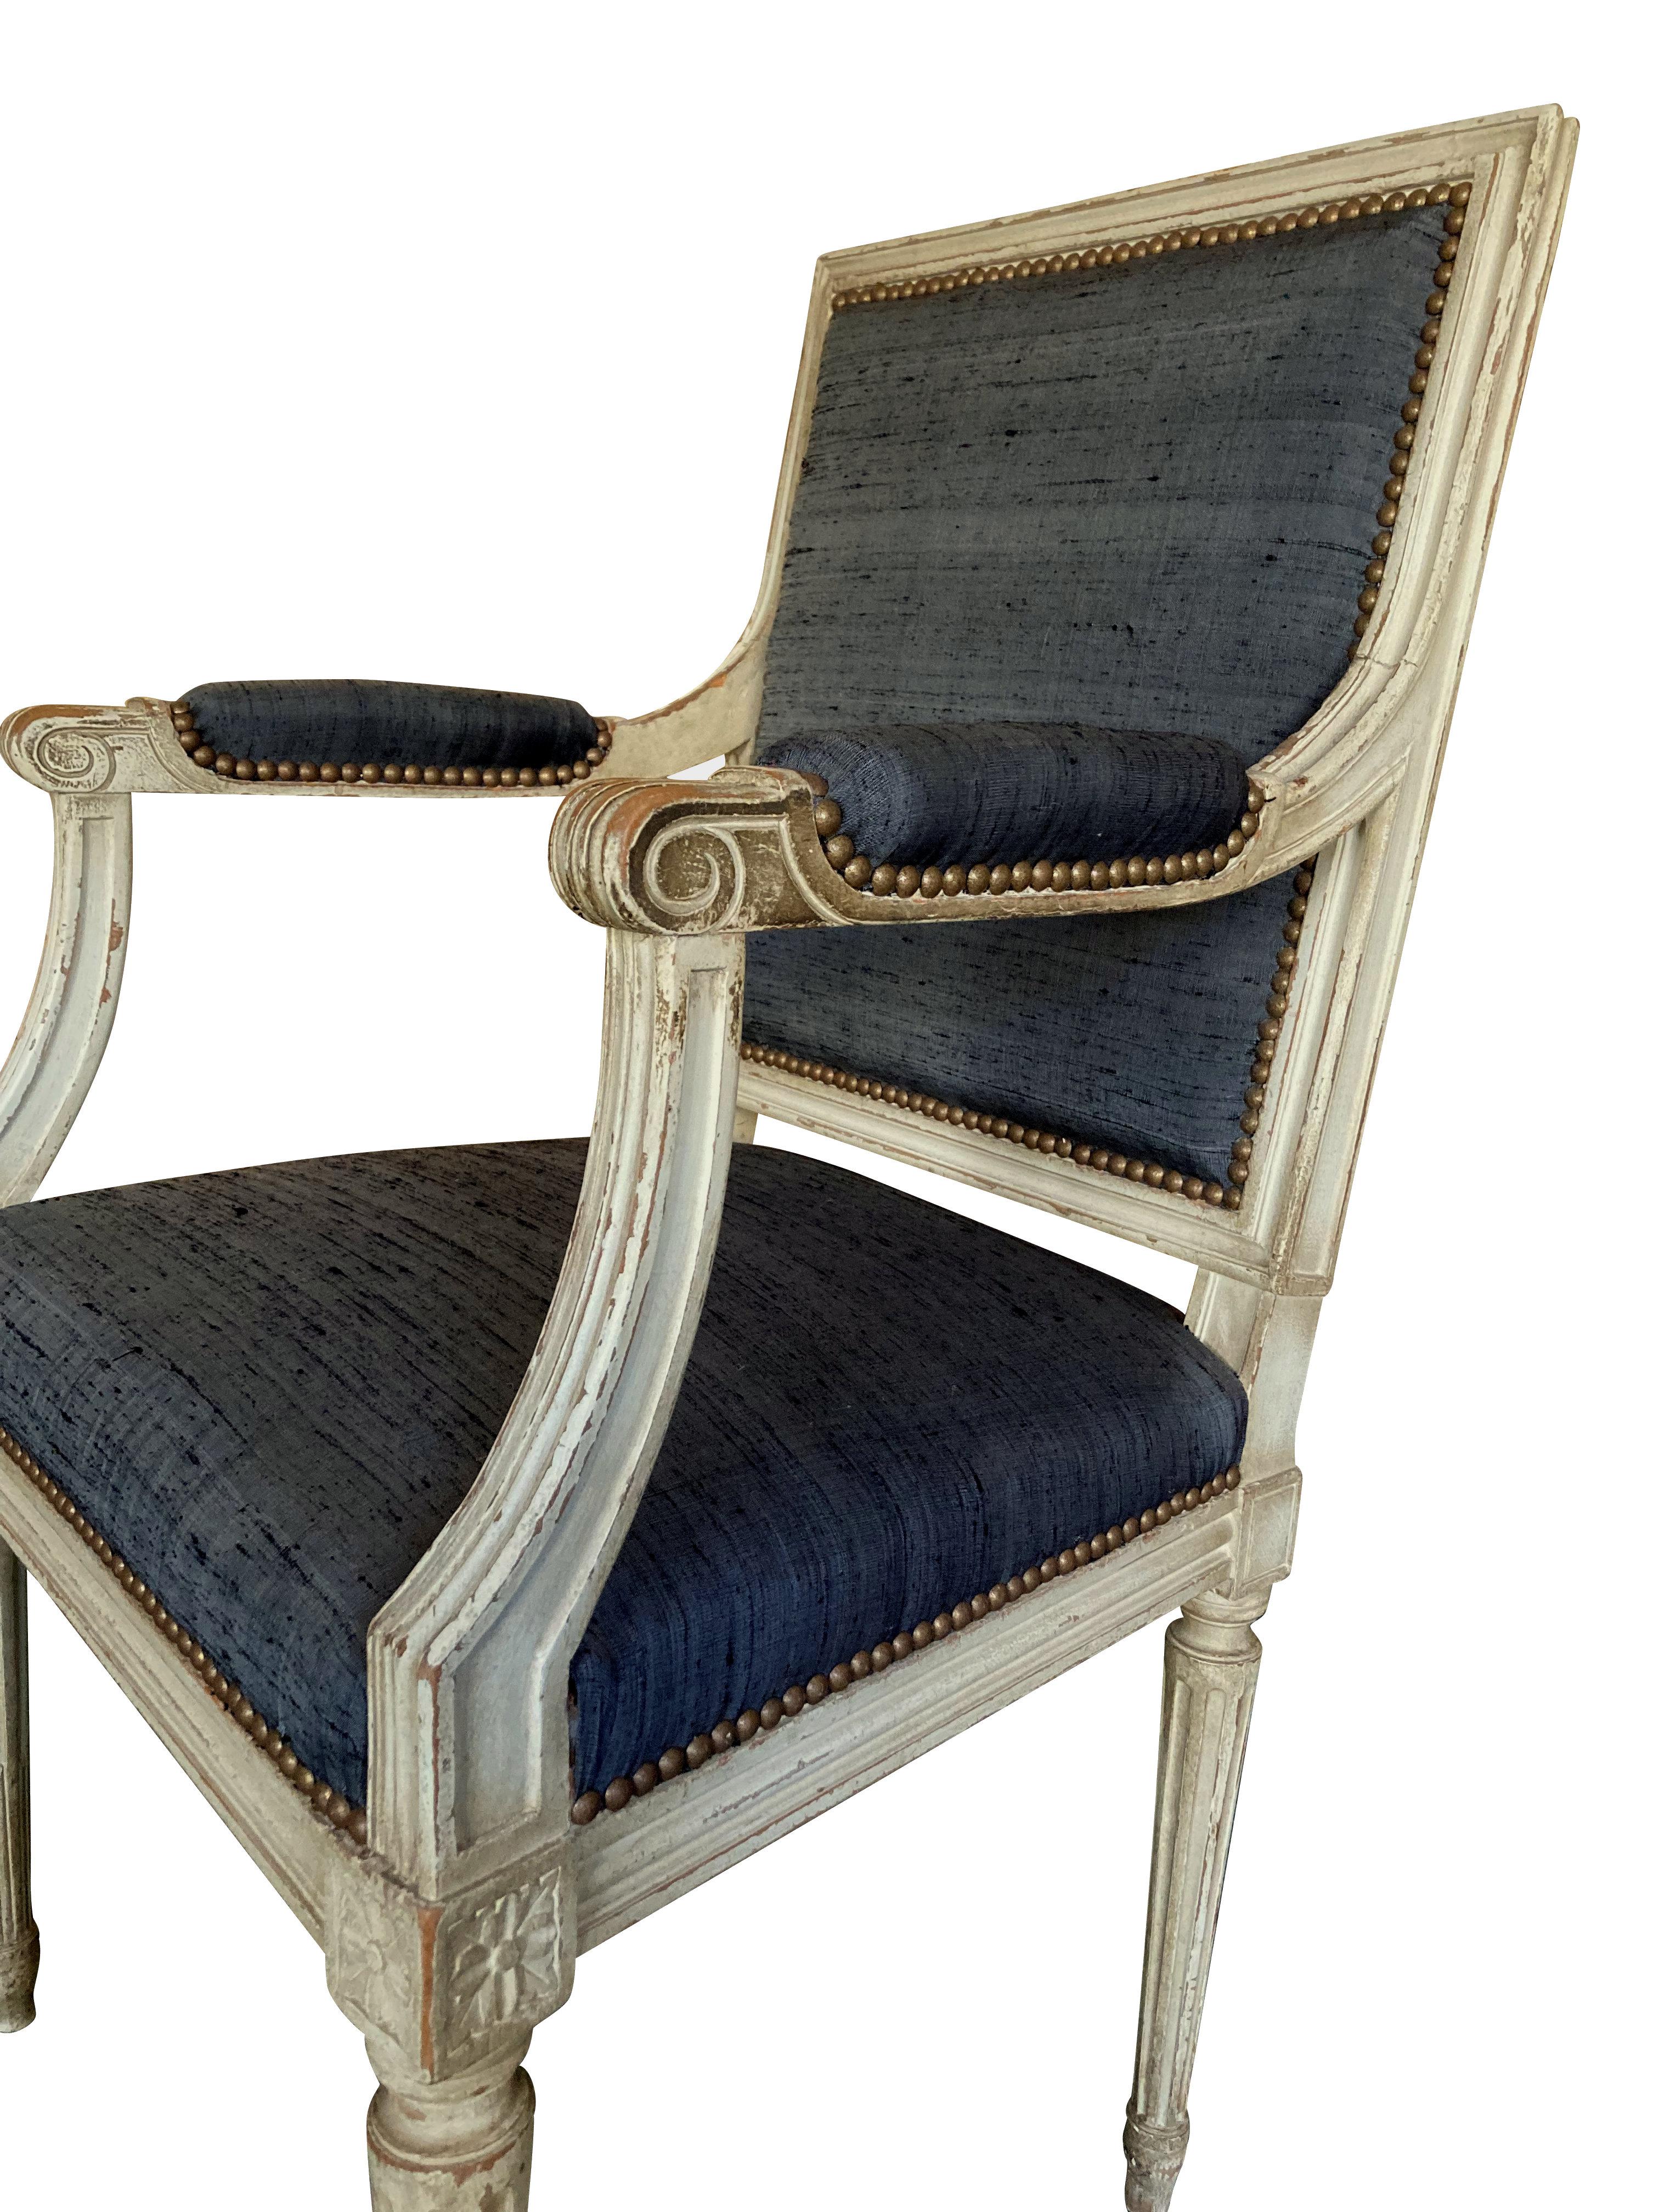 A pair of French Louis XVI style carved and painted armchairs, with the original paints and newly upoholstered in charcoal textured silk.